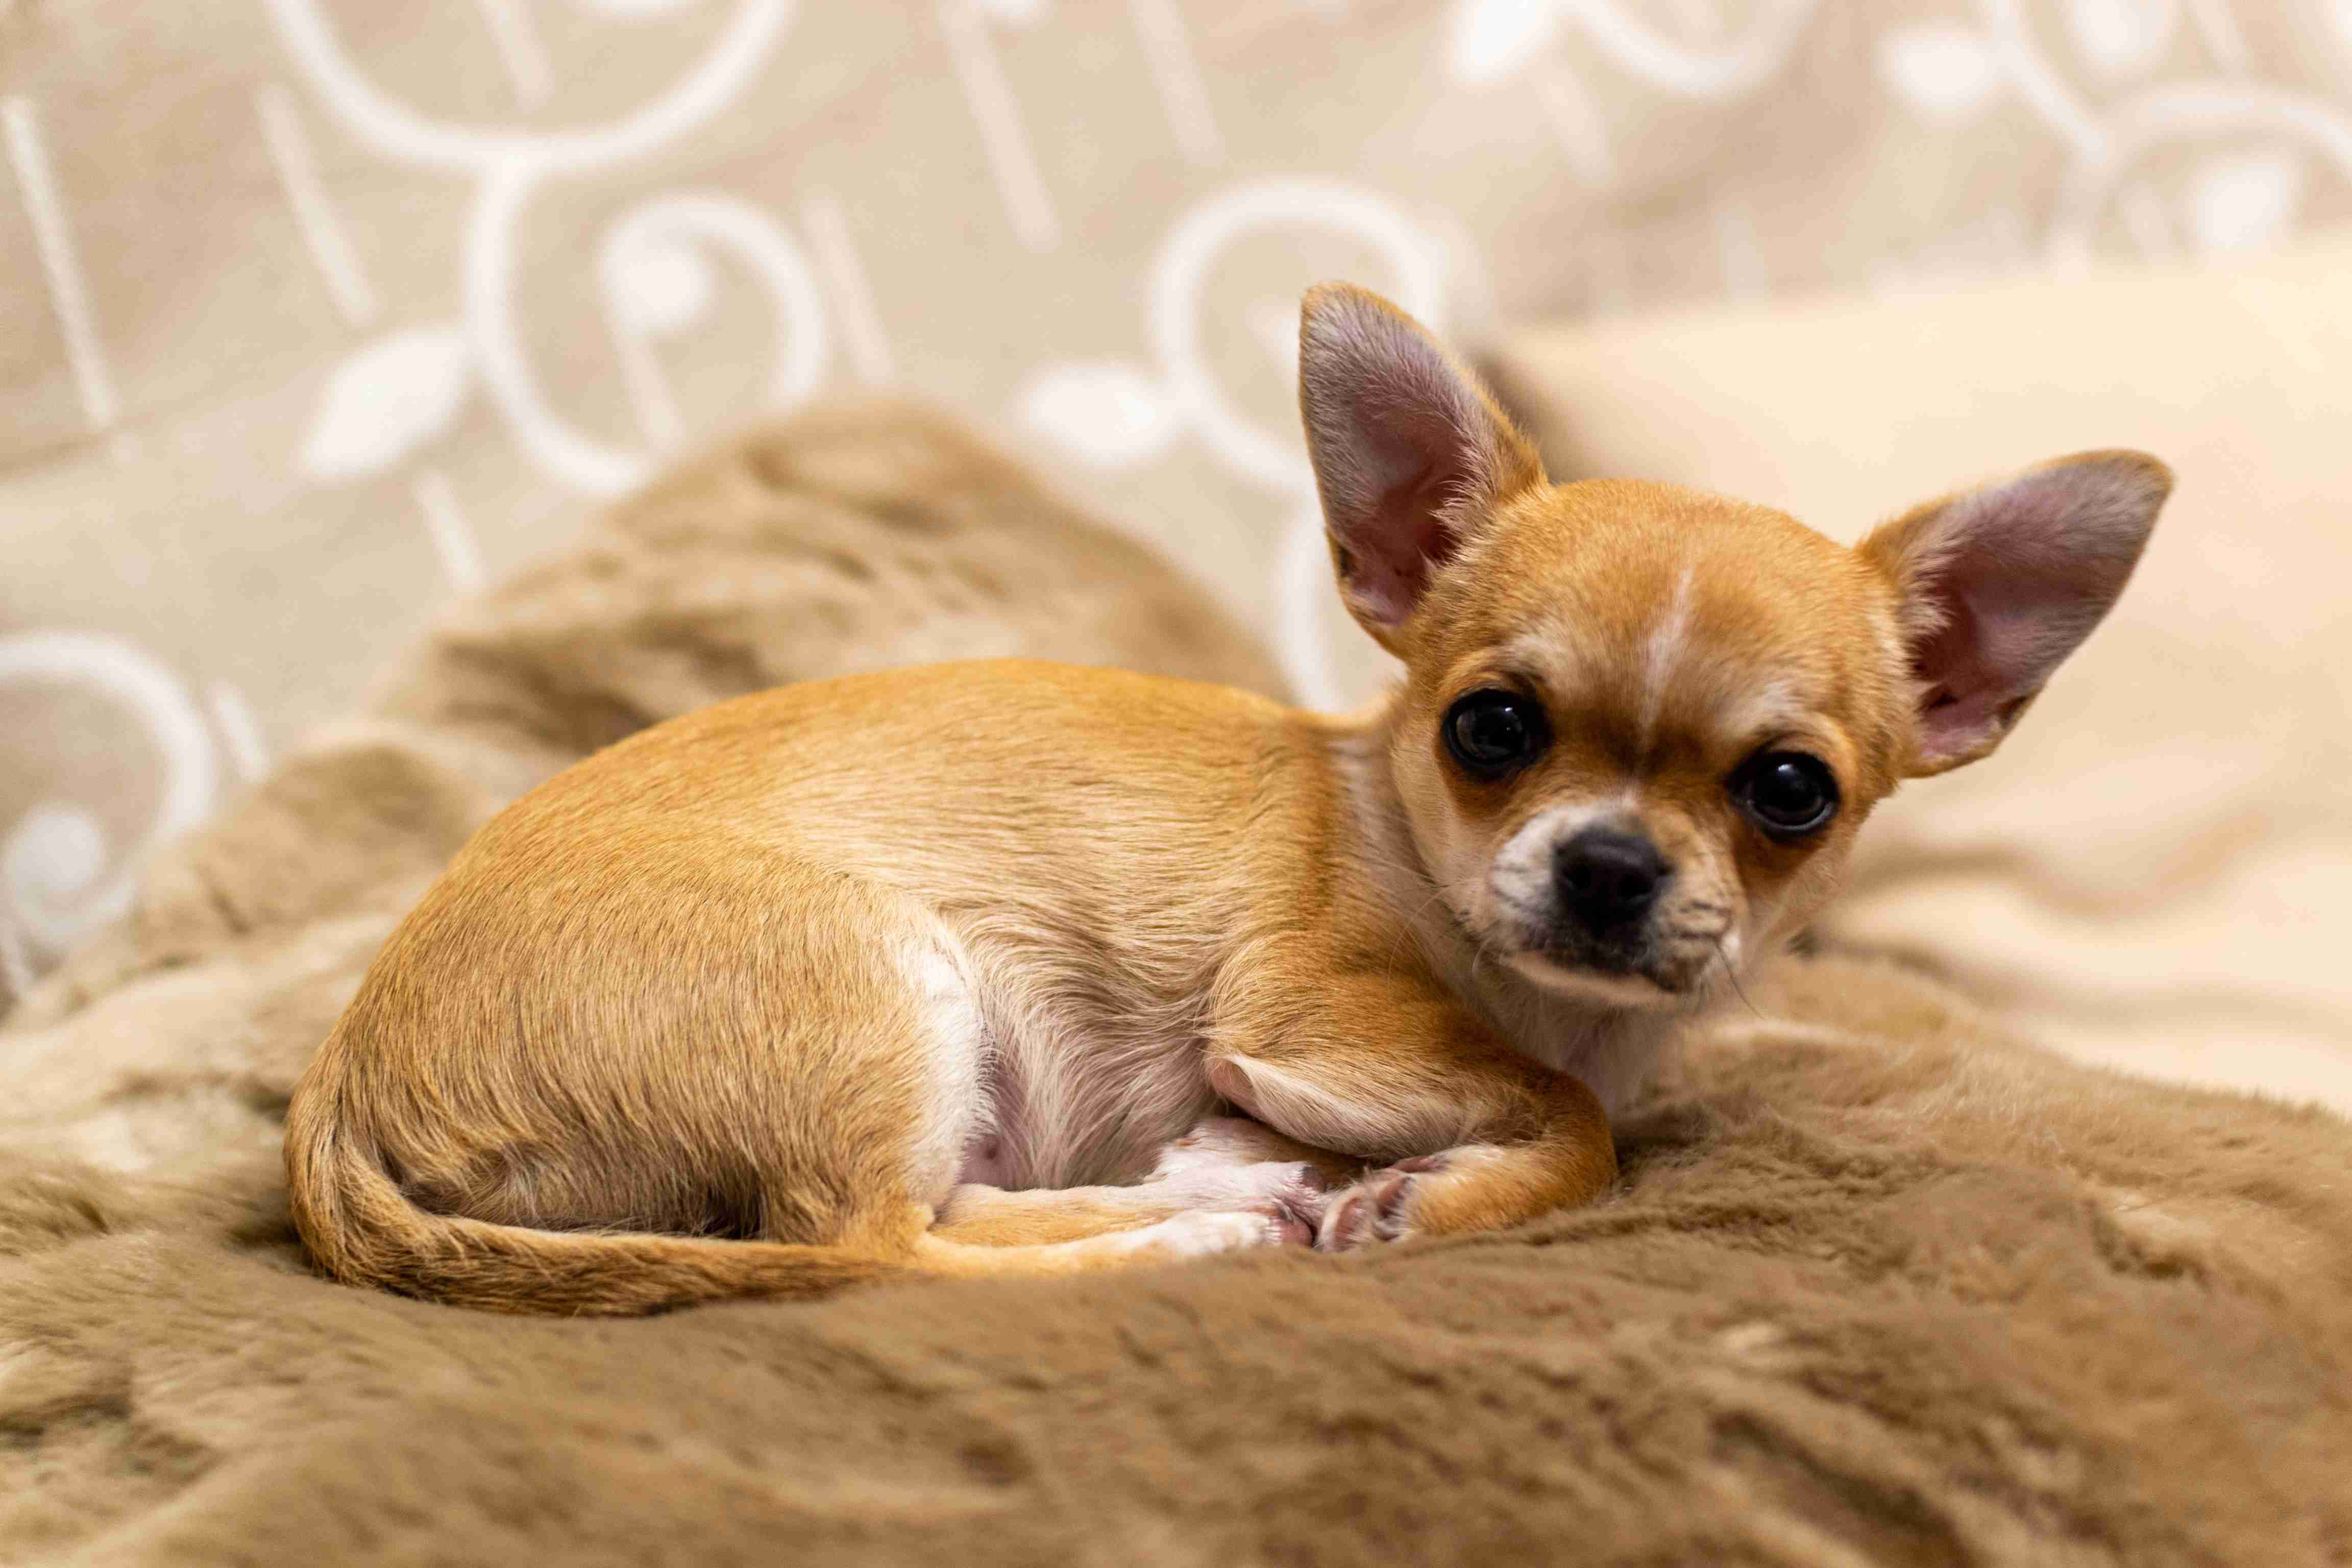 Can Chihuahuas become aggressive due to a lack of attention or affection from their owners?